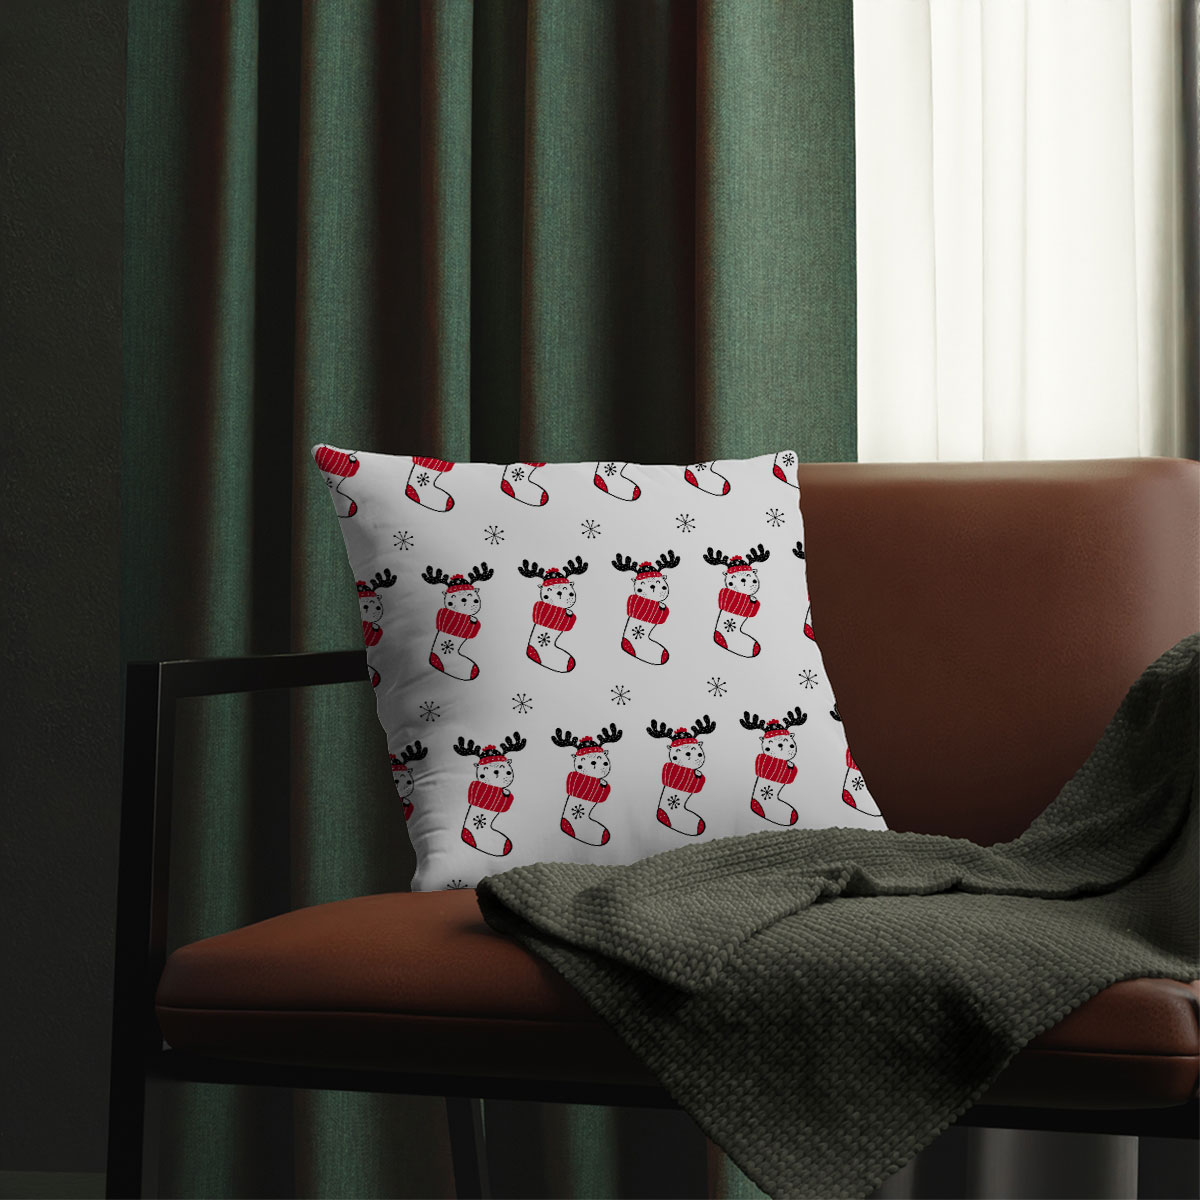 Reindeer Clipart In Hand Drawn Red Socks And Snowflake Clipart Seamless White Pattern Waterproof Pillows